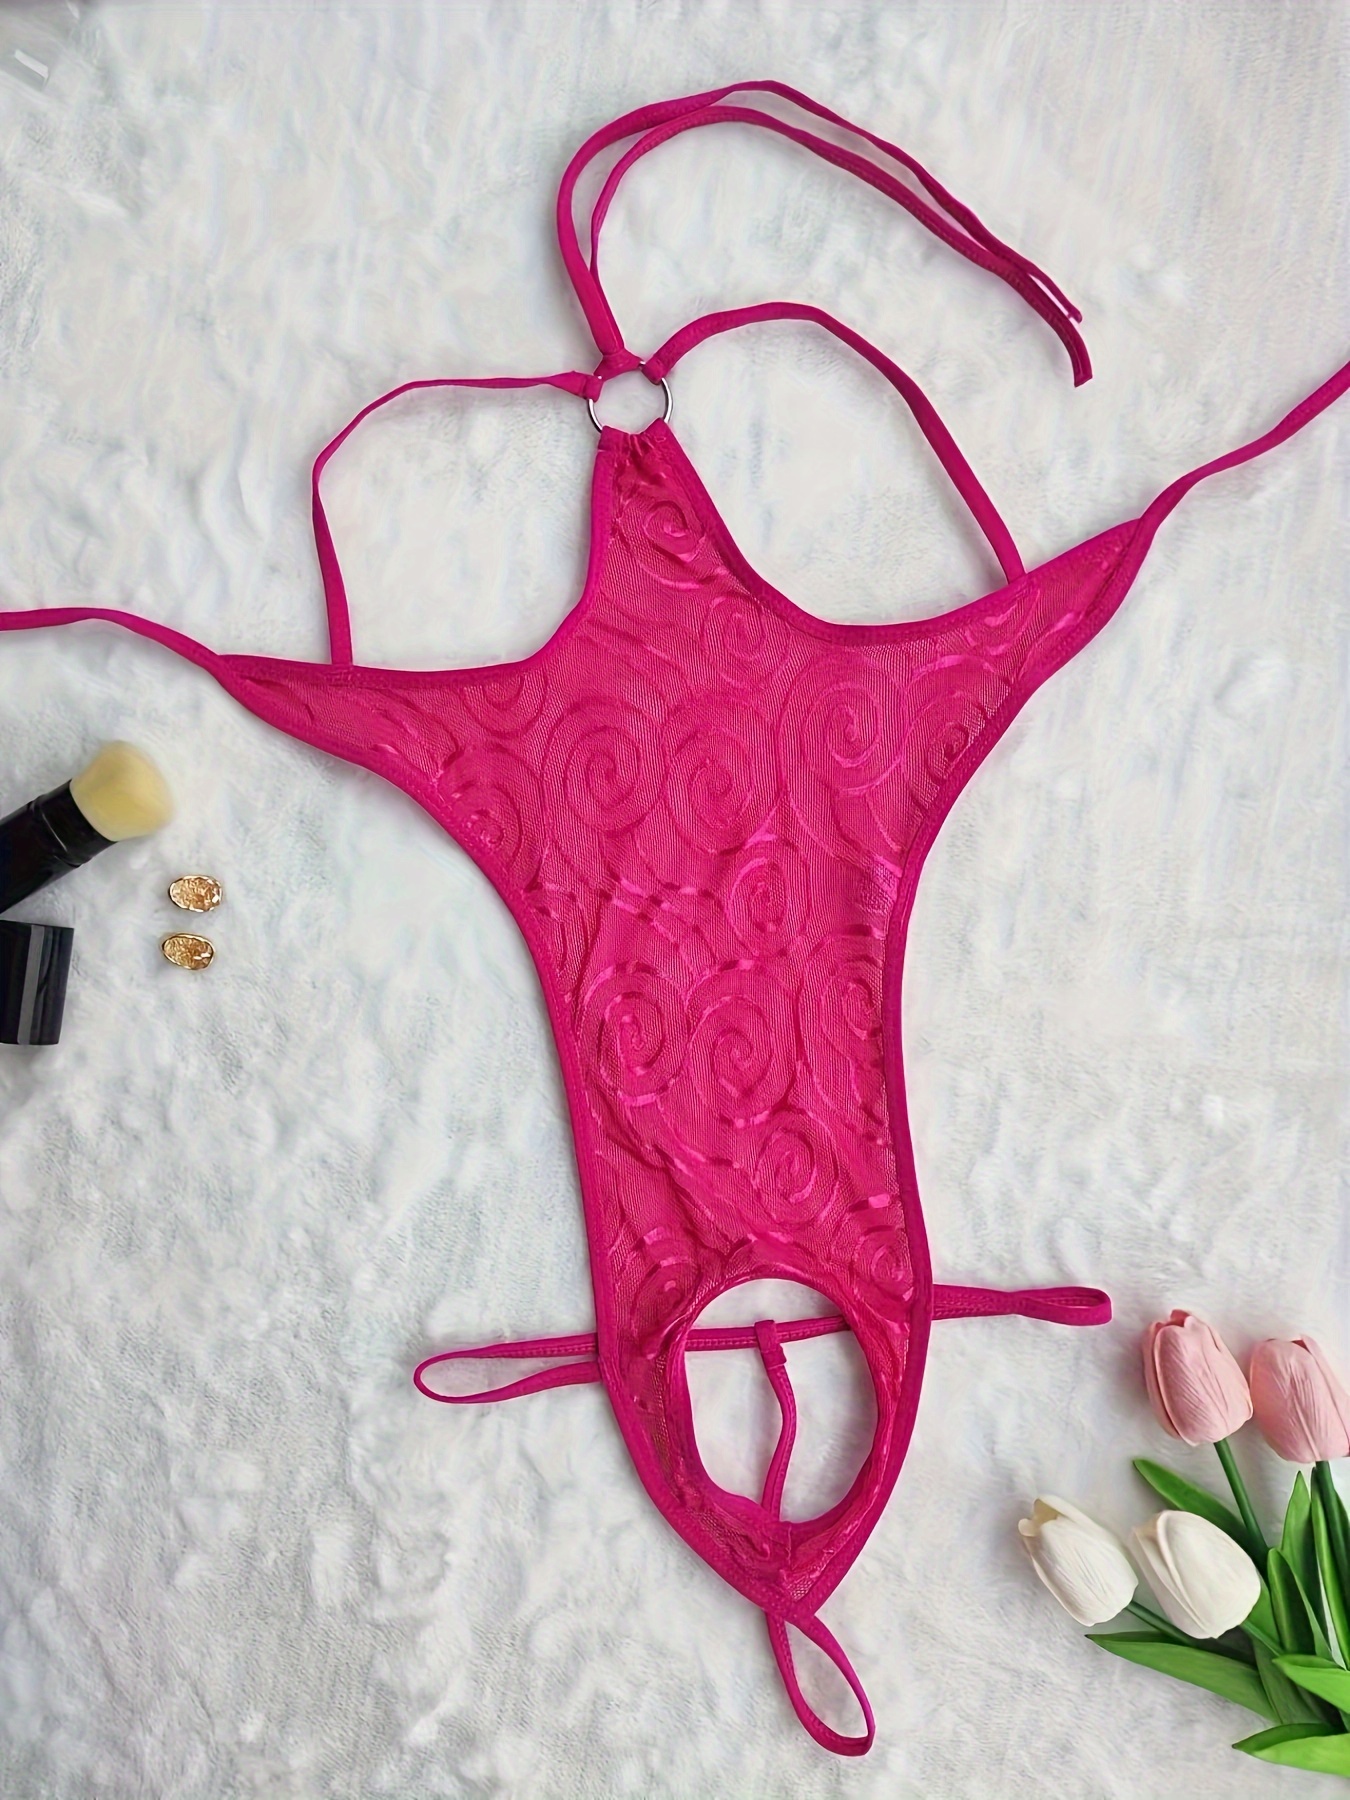 Lace and Mesh Teddy - Pink